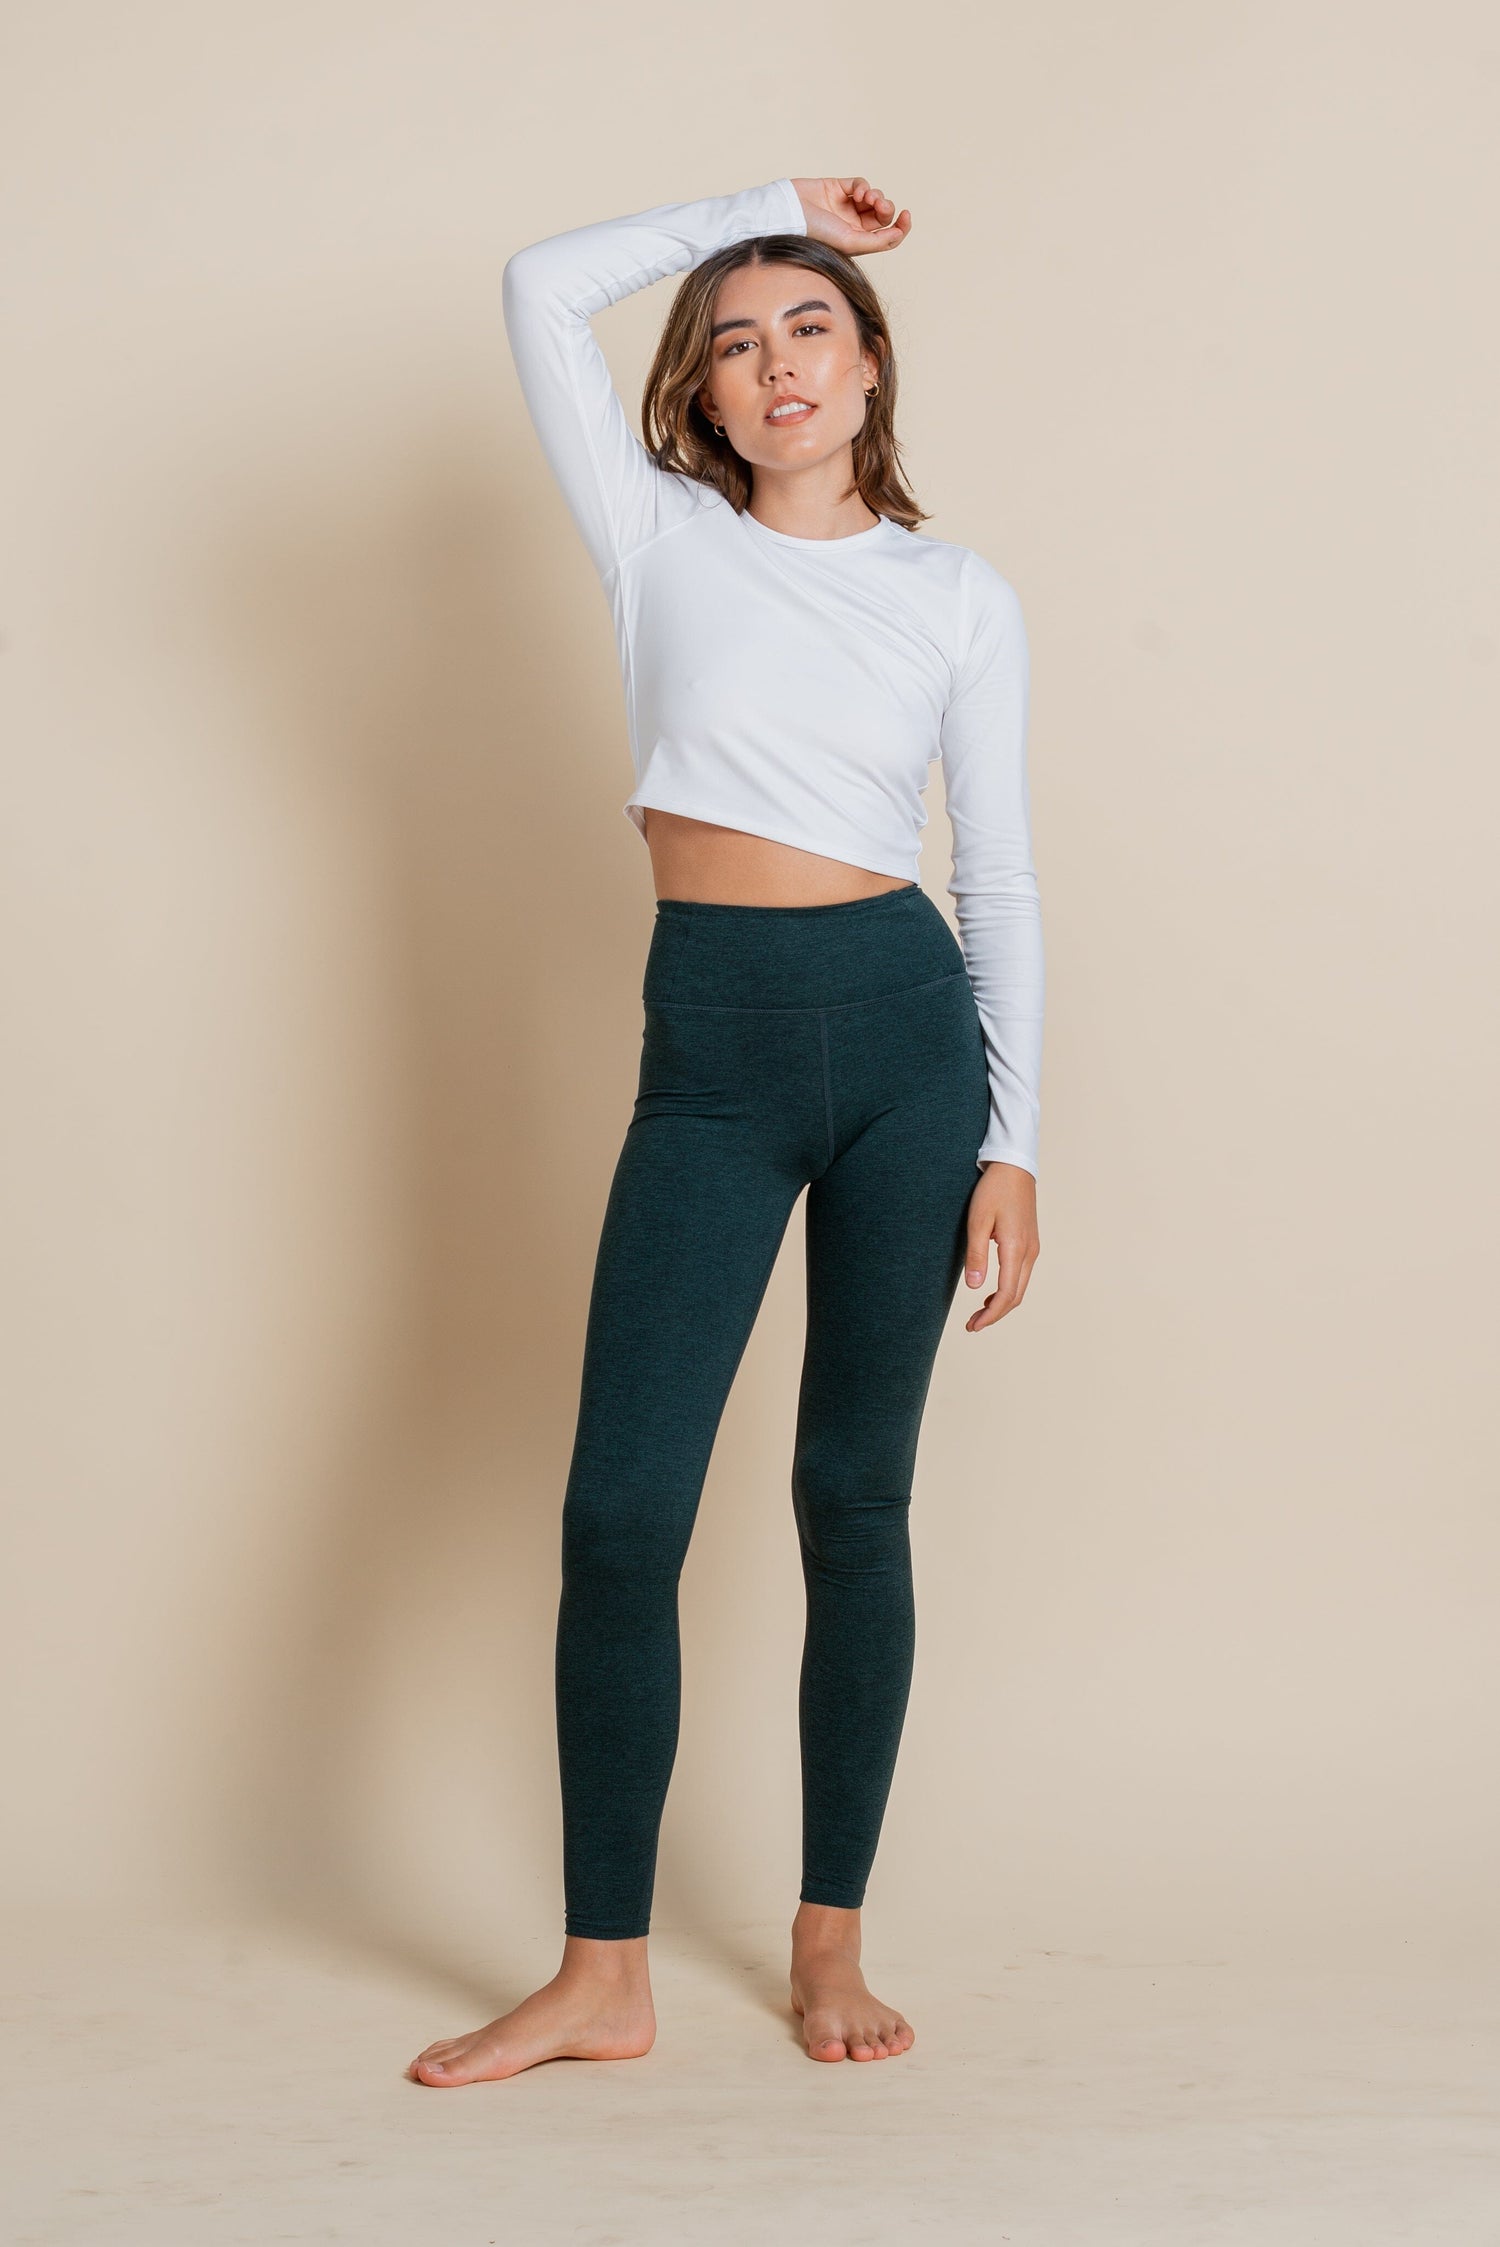 Girlfriend Collective - ReSet Lift Long Sleeve – Made from Recycled Plastic Bottles - Weekendbee - sustainable sportswear